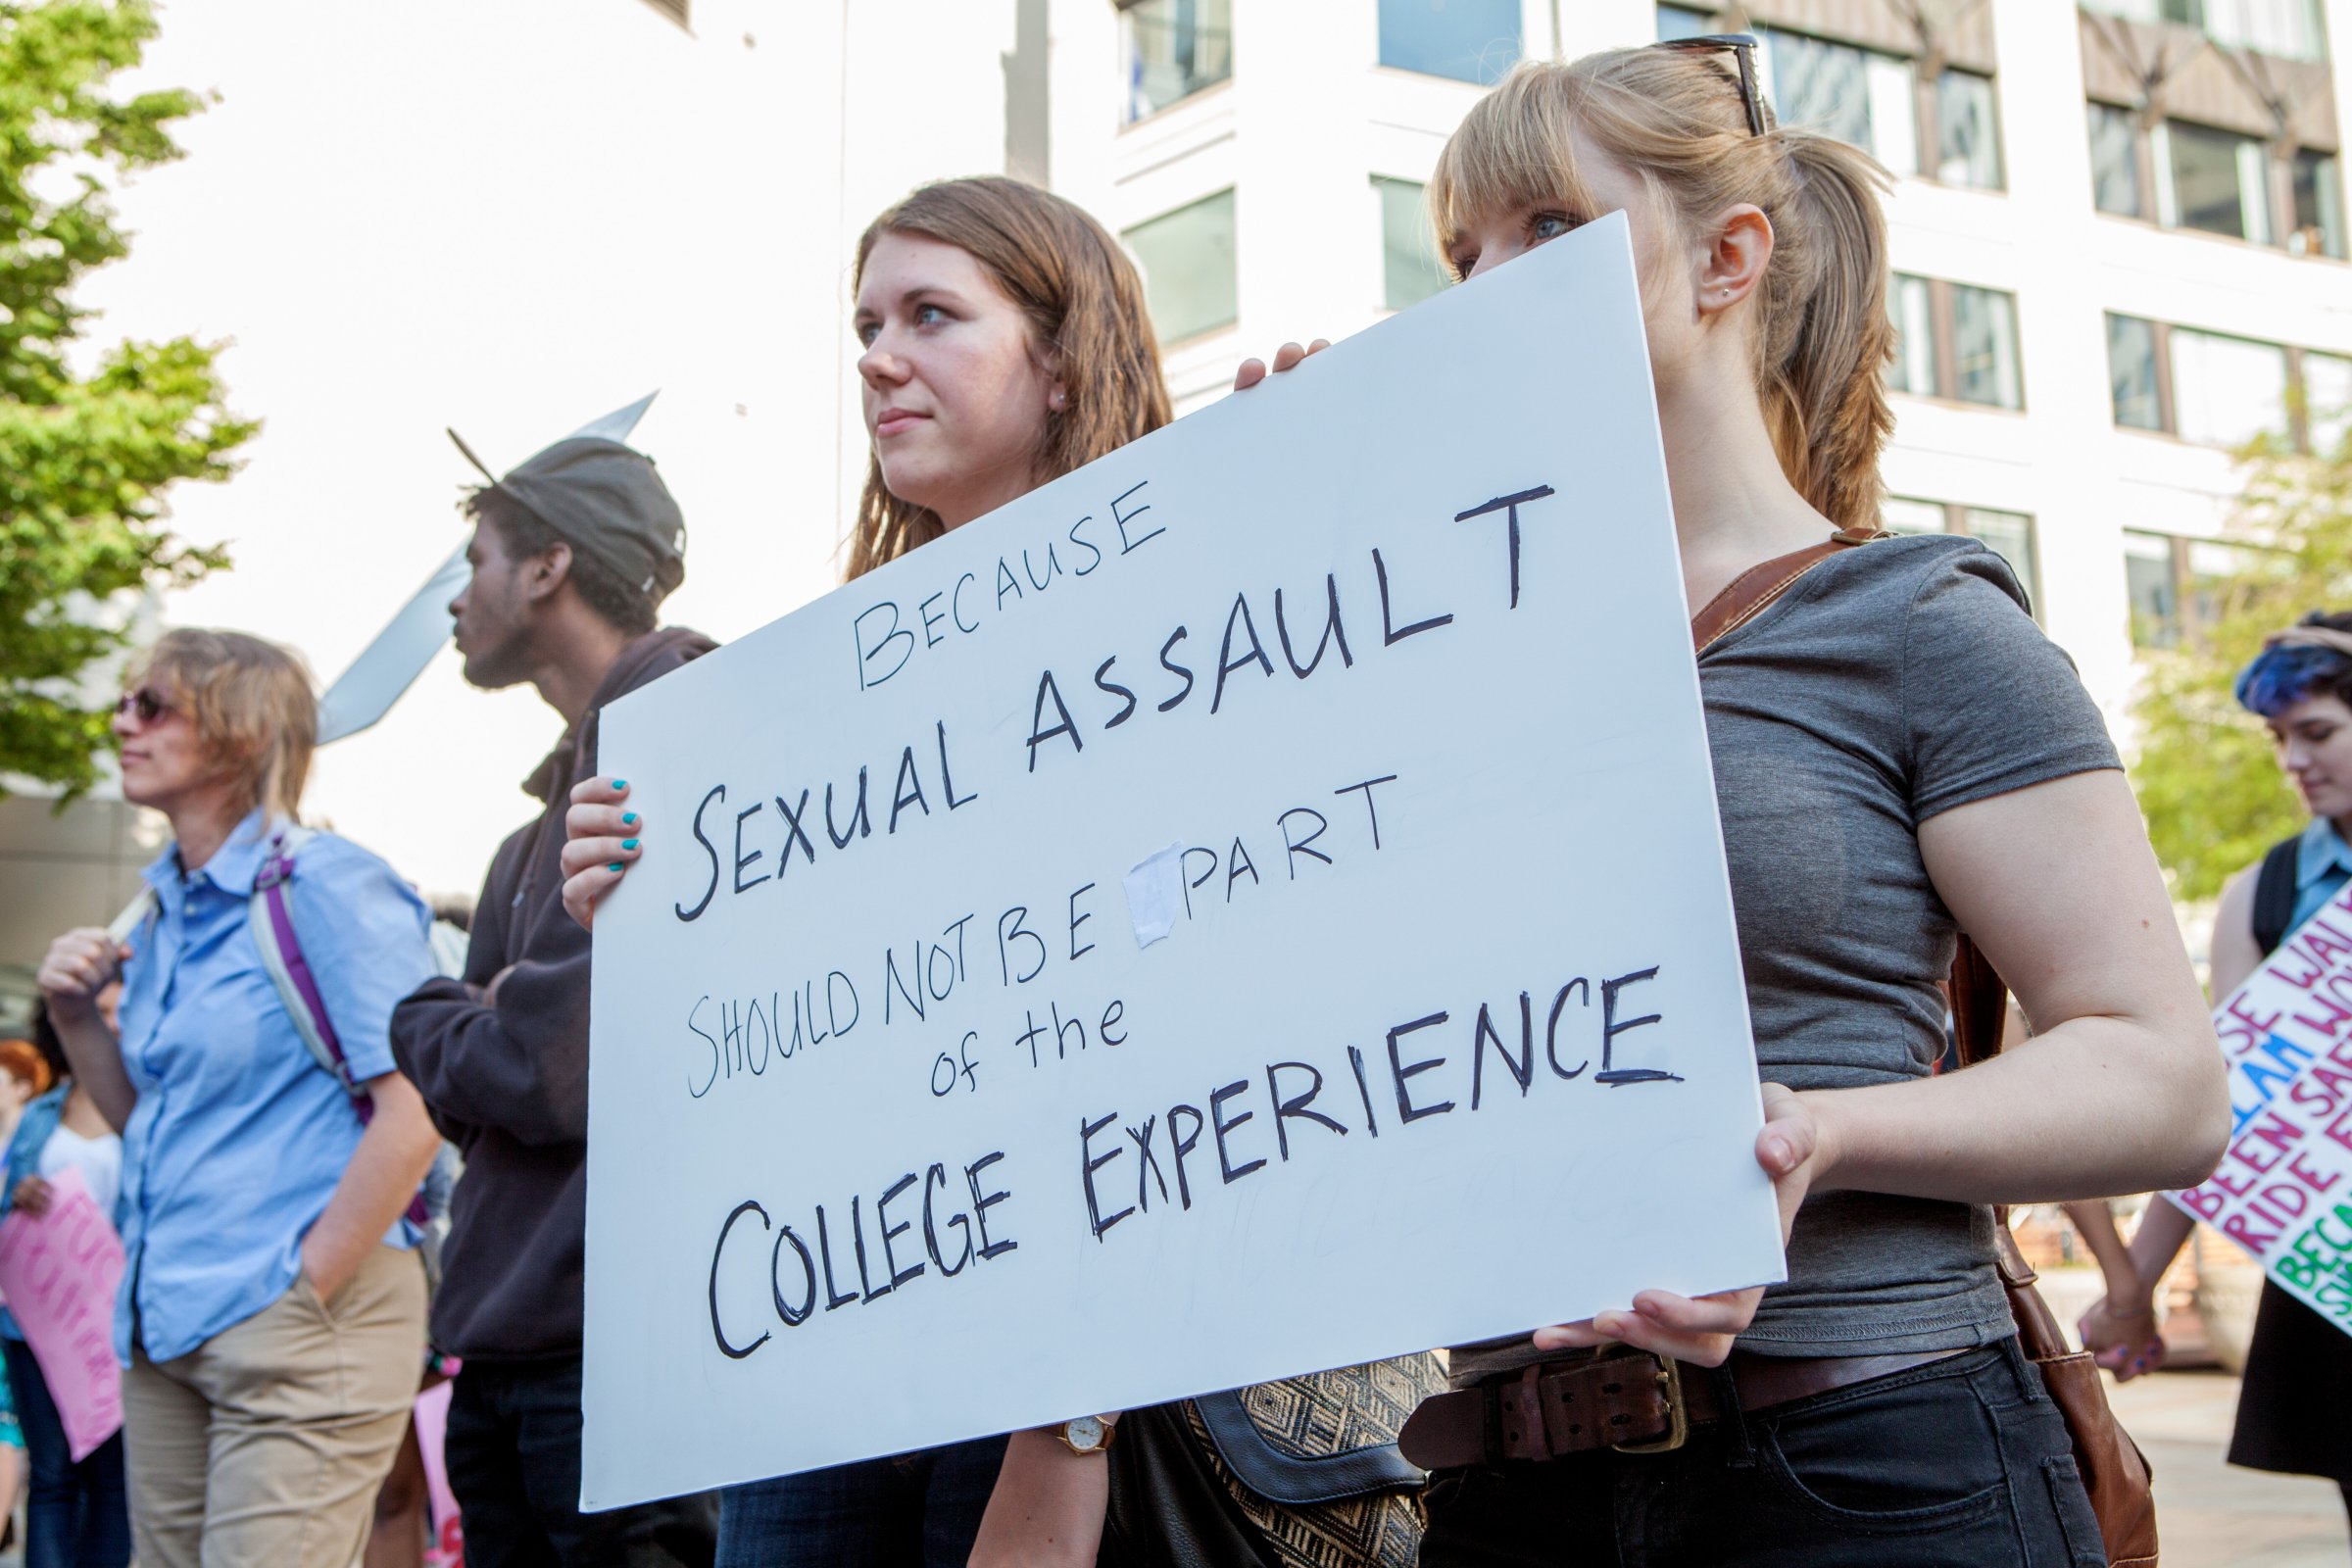 Demonstrators protest sexual assault on college campuses at the #YesAllWomen rally in solidarity with those affected by violence in Seattle on May 30, 2014.